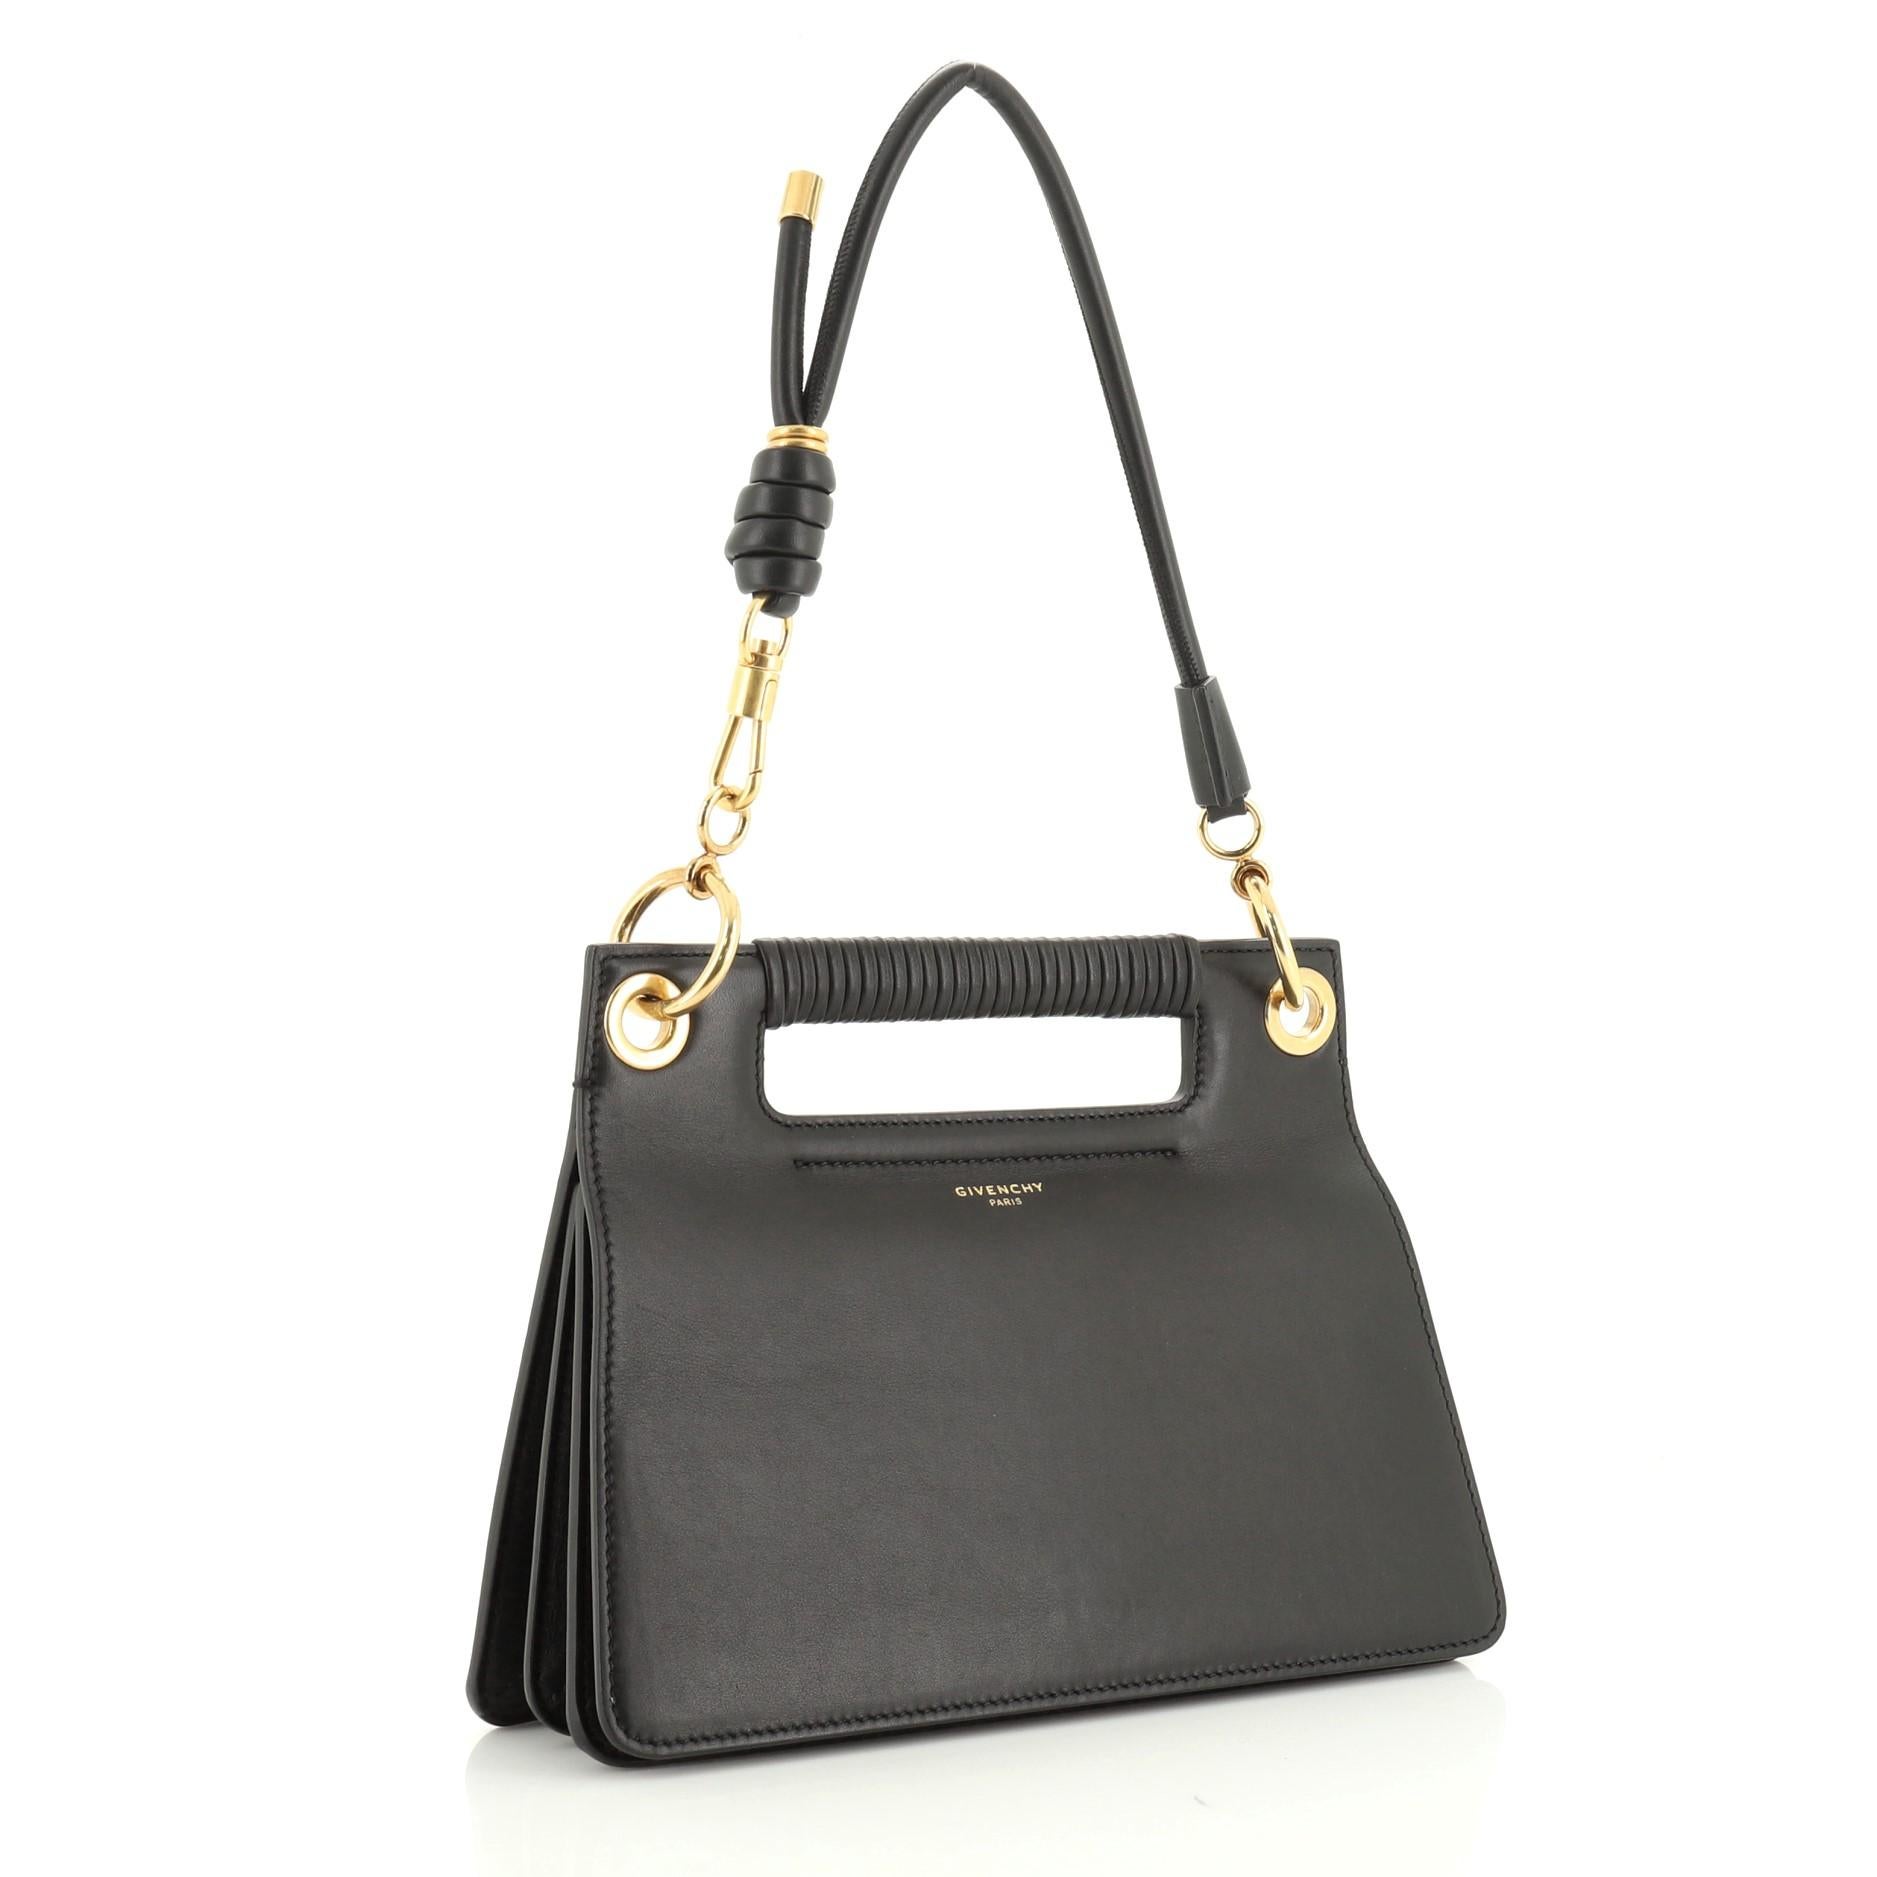 This Givenchy Whip Shoulder Bag Leather Small, crafted from black leather interior, features cutout and wrapped top handle, knotted shoulder strap, exterior zip pocket and gold-tone hardware. Its push-lock closure opens to a neutral microfiber